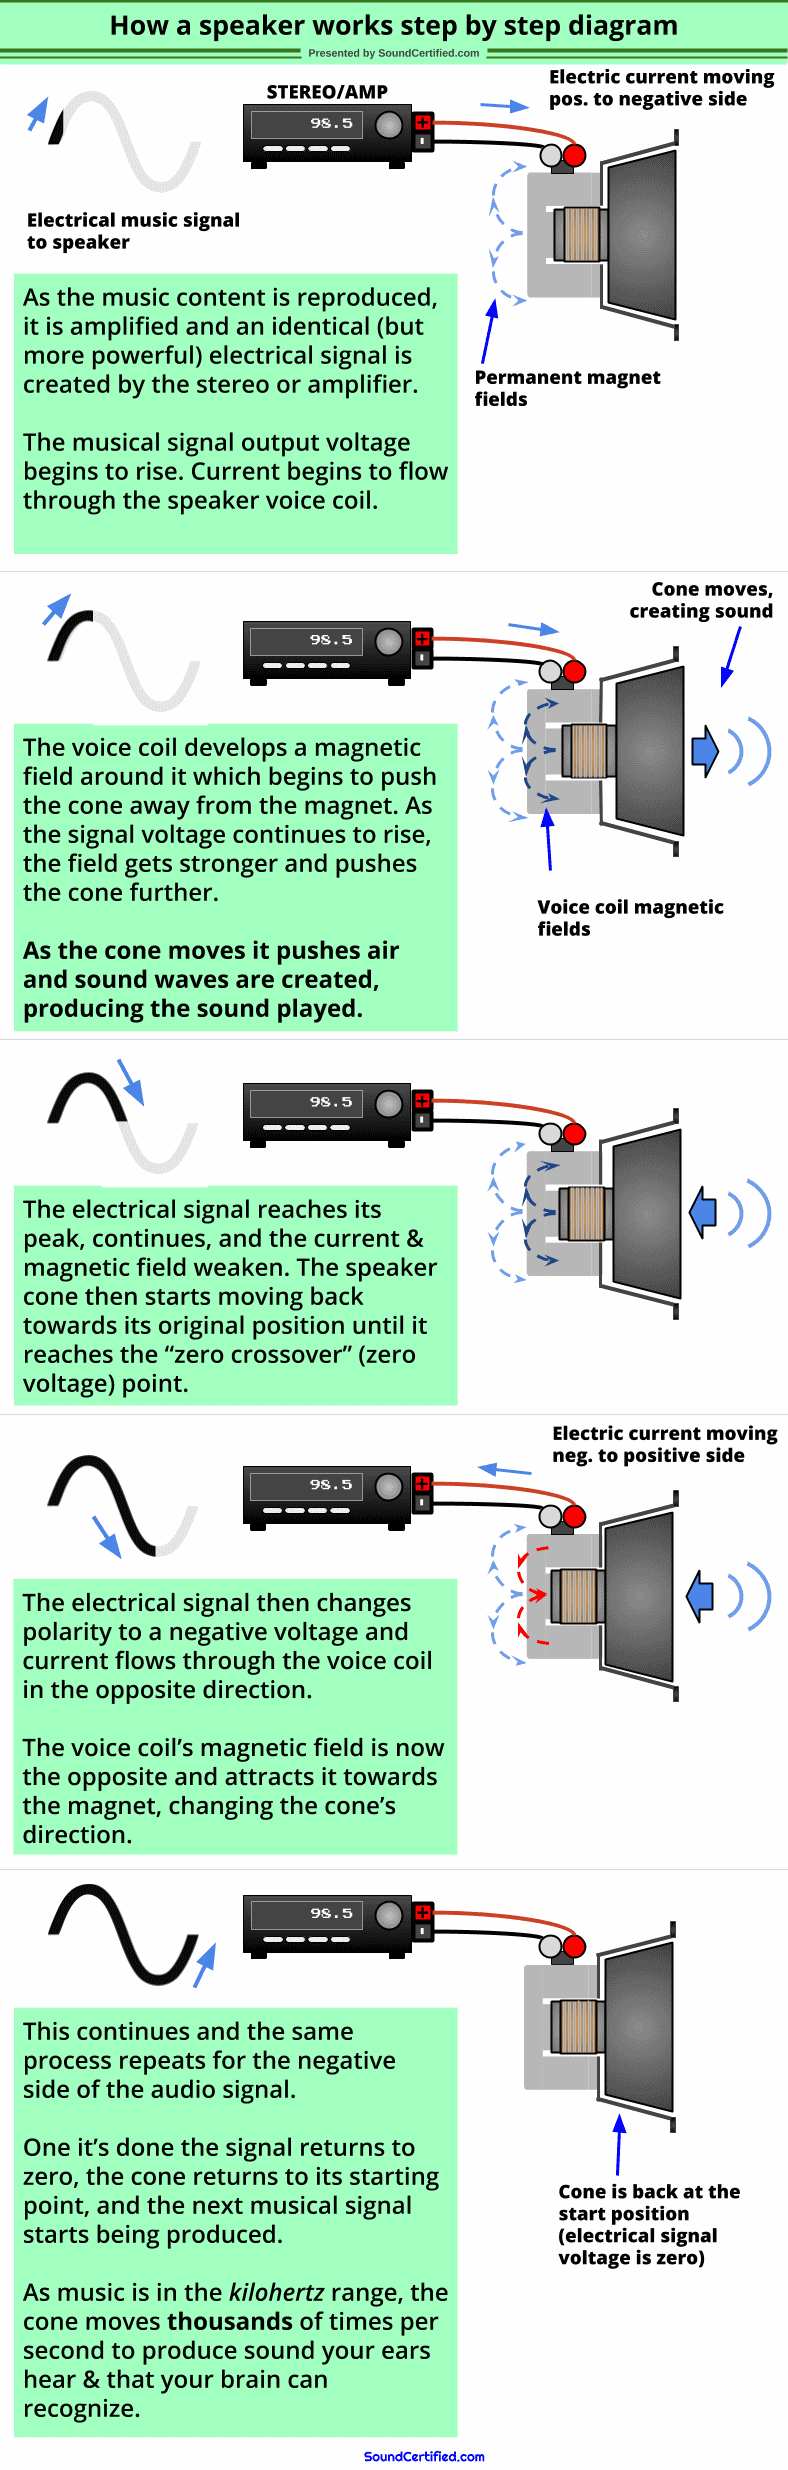 how does a speaker work step by step diagram